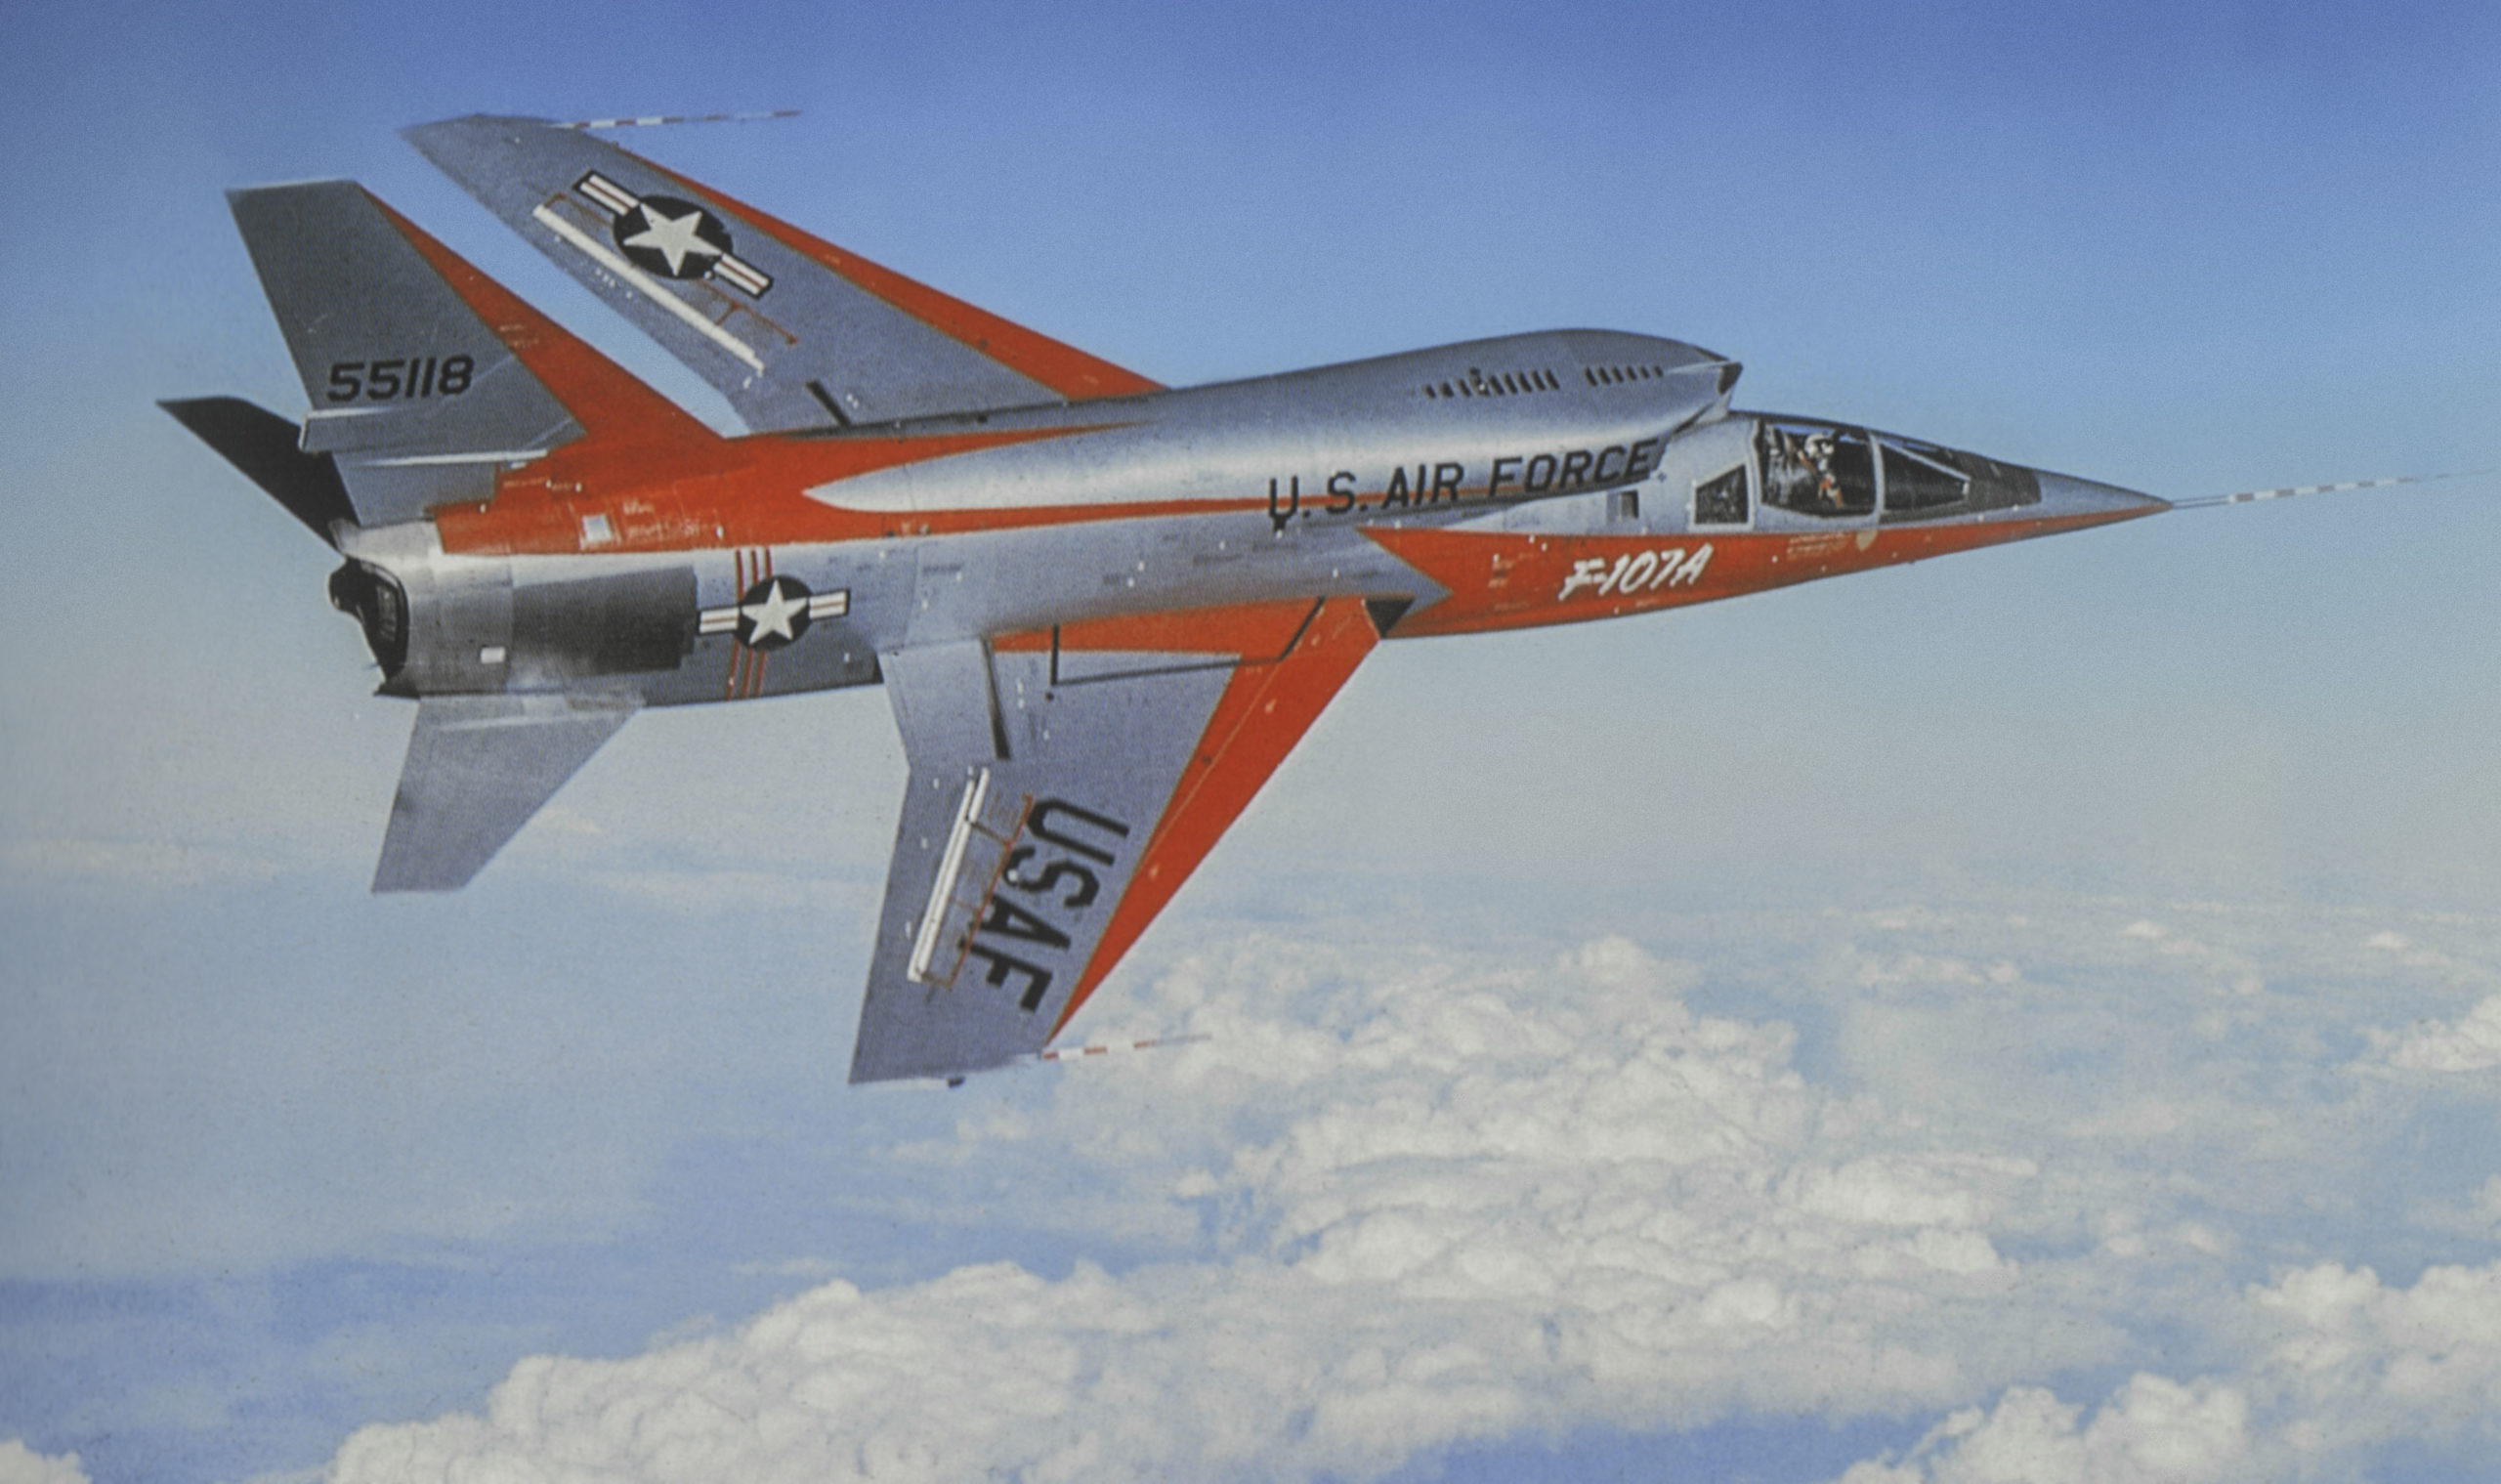 Was This Strange Jet the Best Fighter the U.S. Air Force Never Bought?